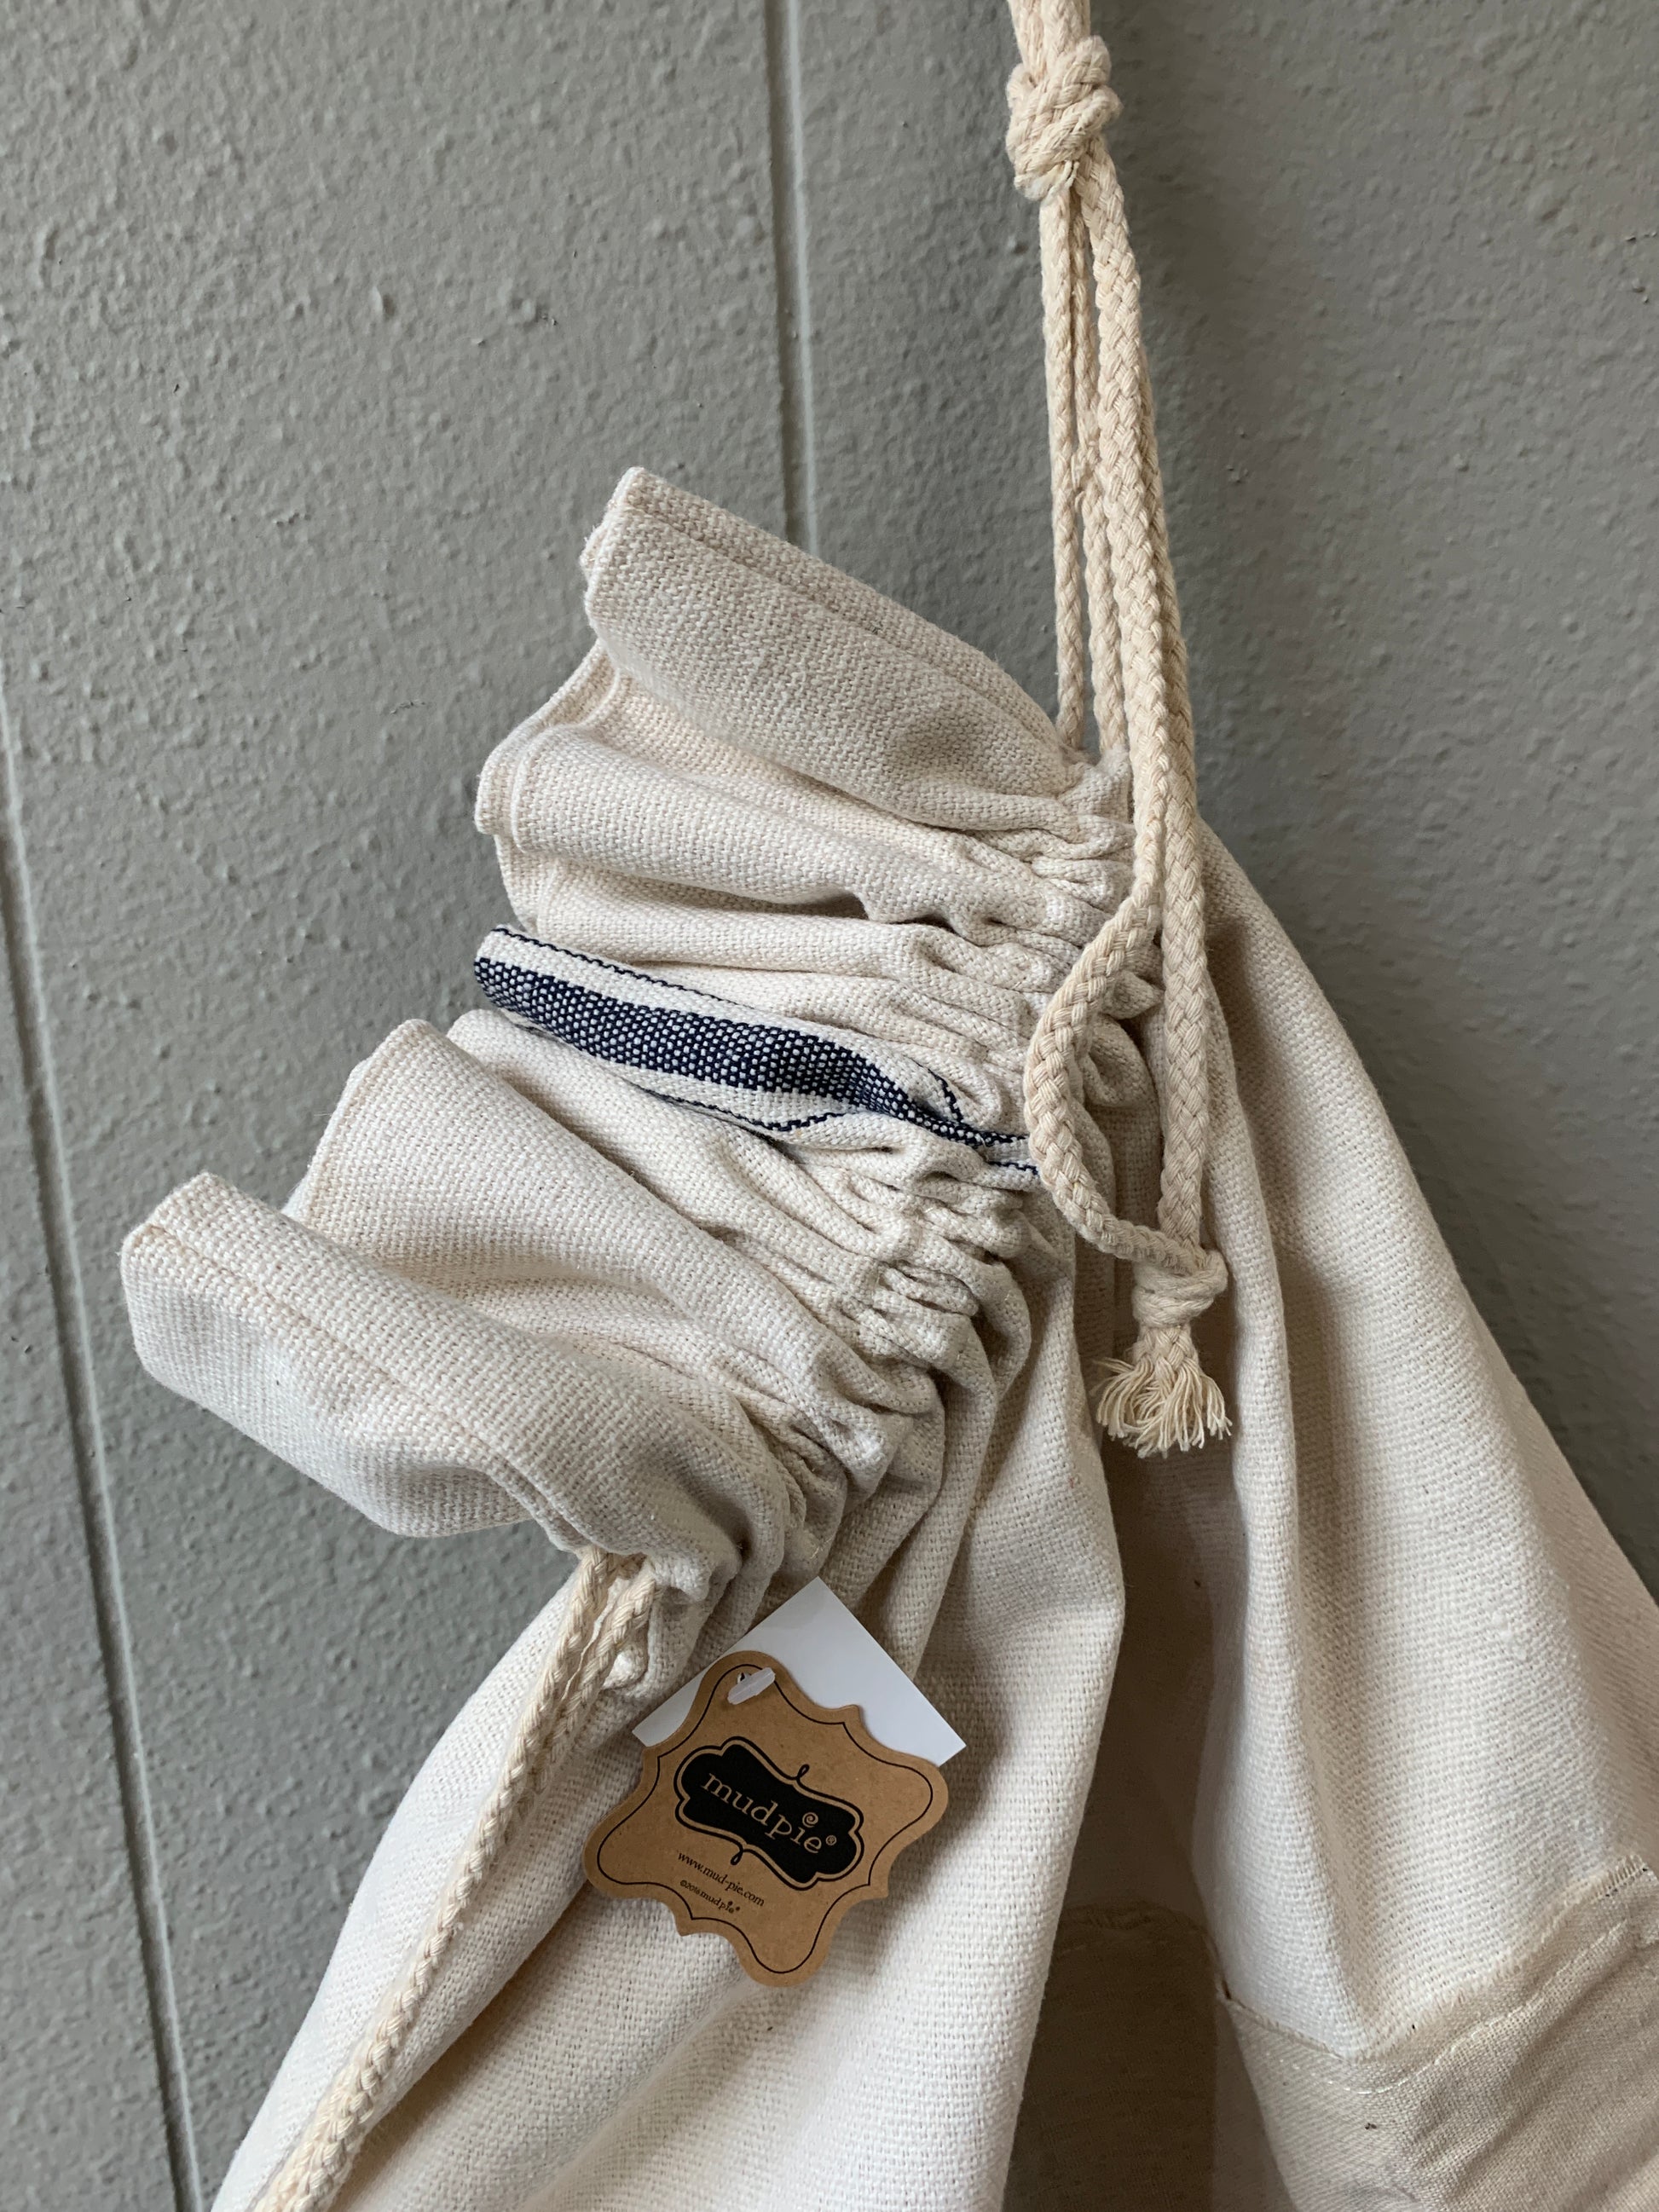 Grainsack laundry bag features applied front canvas patch with frayed edges and "Laundry" printed sentiments and canvas rope drawstring.  Size: 30" x 22"